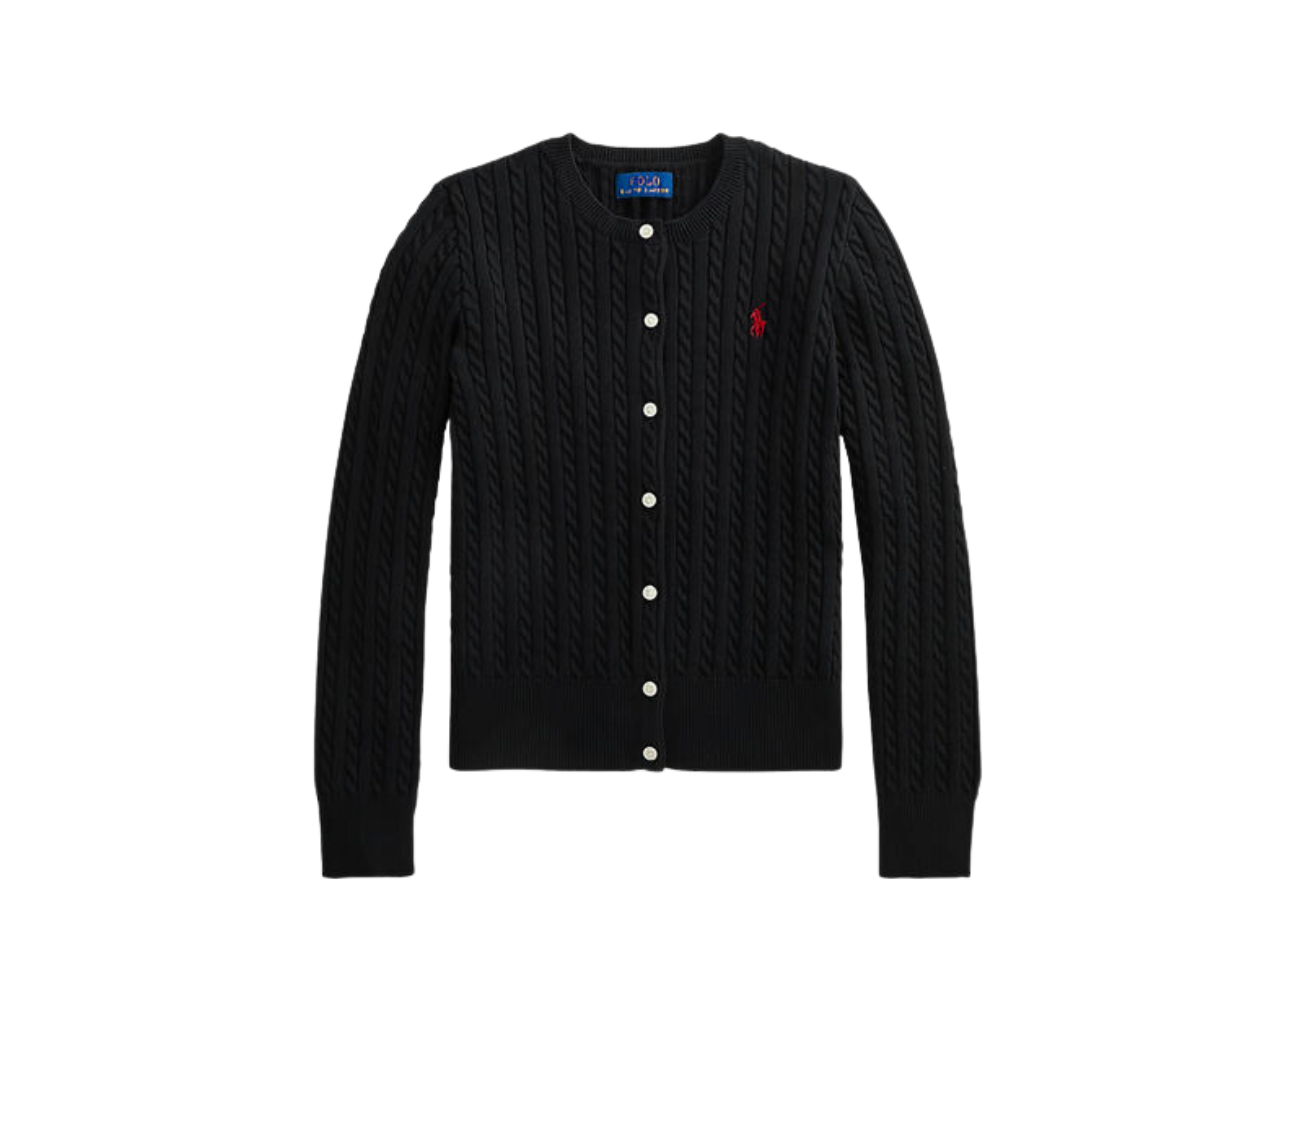 RALPH LAUREN - Cable knit cardigan - 3 years